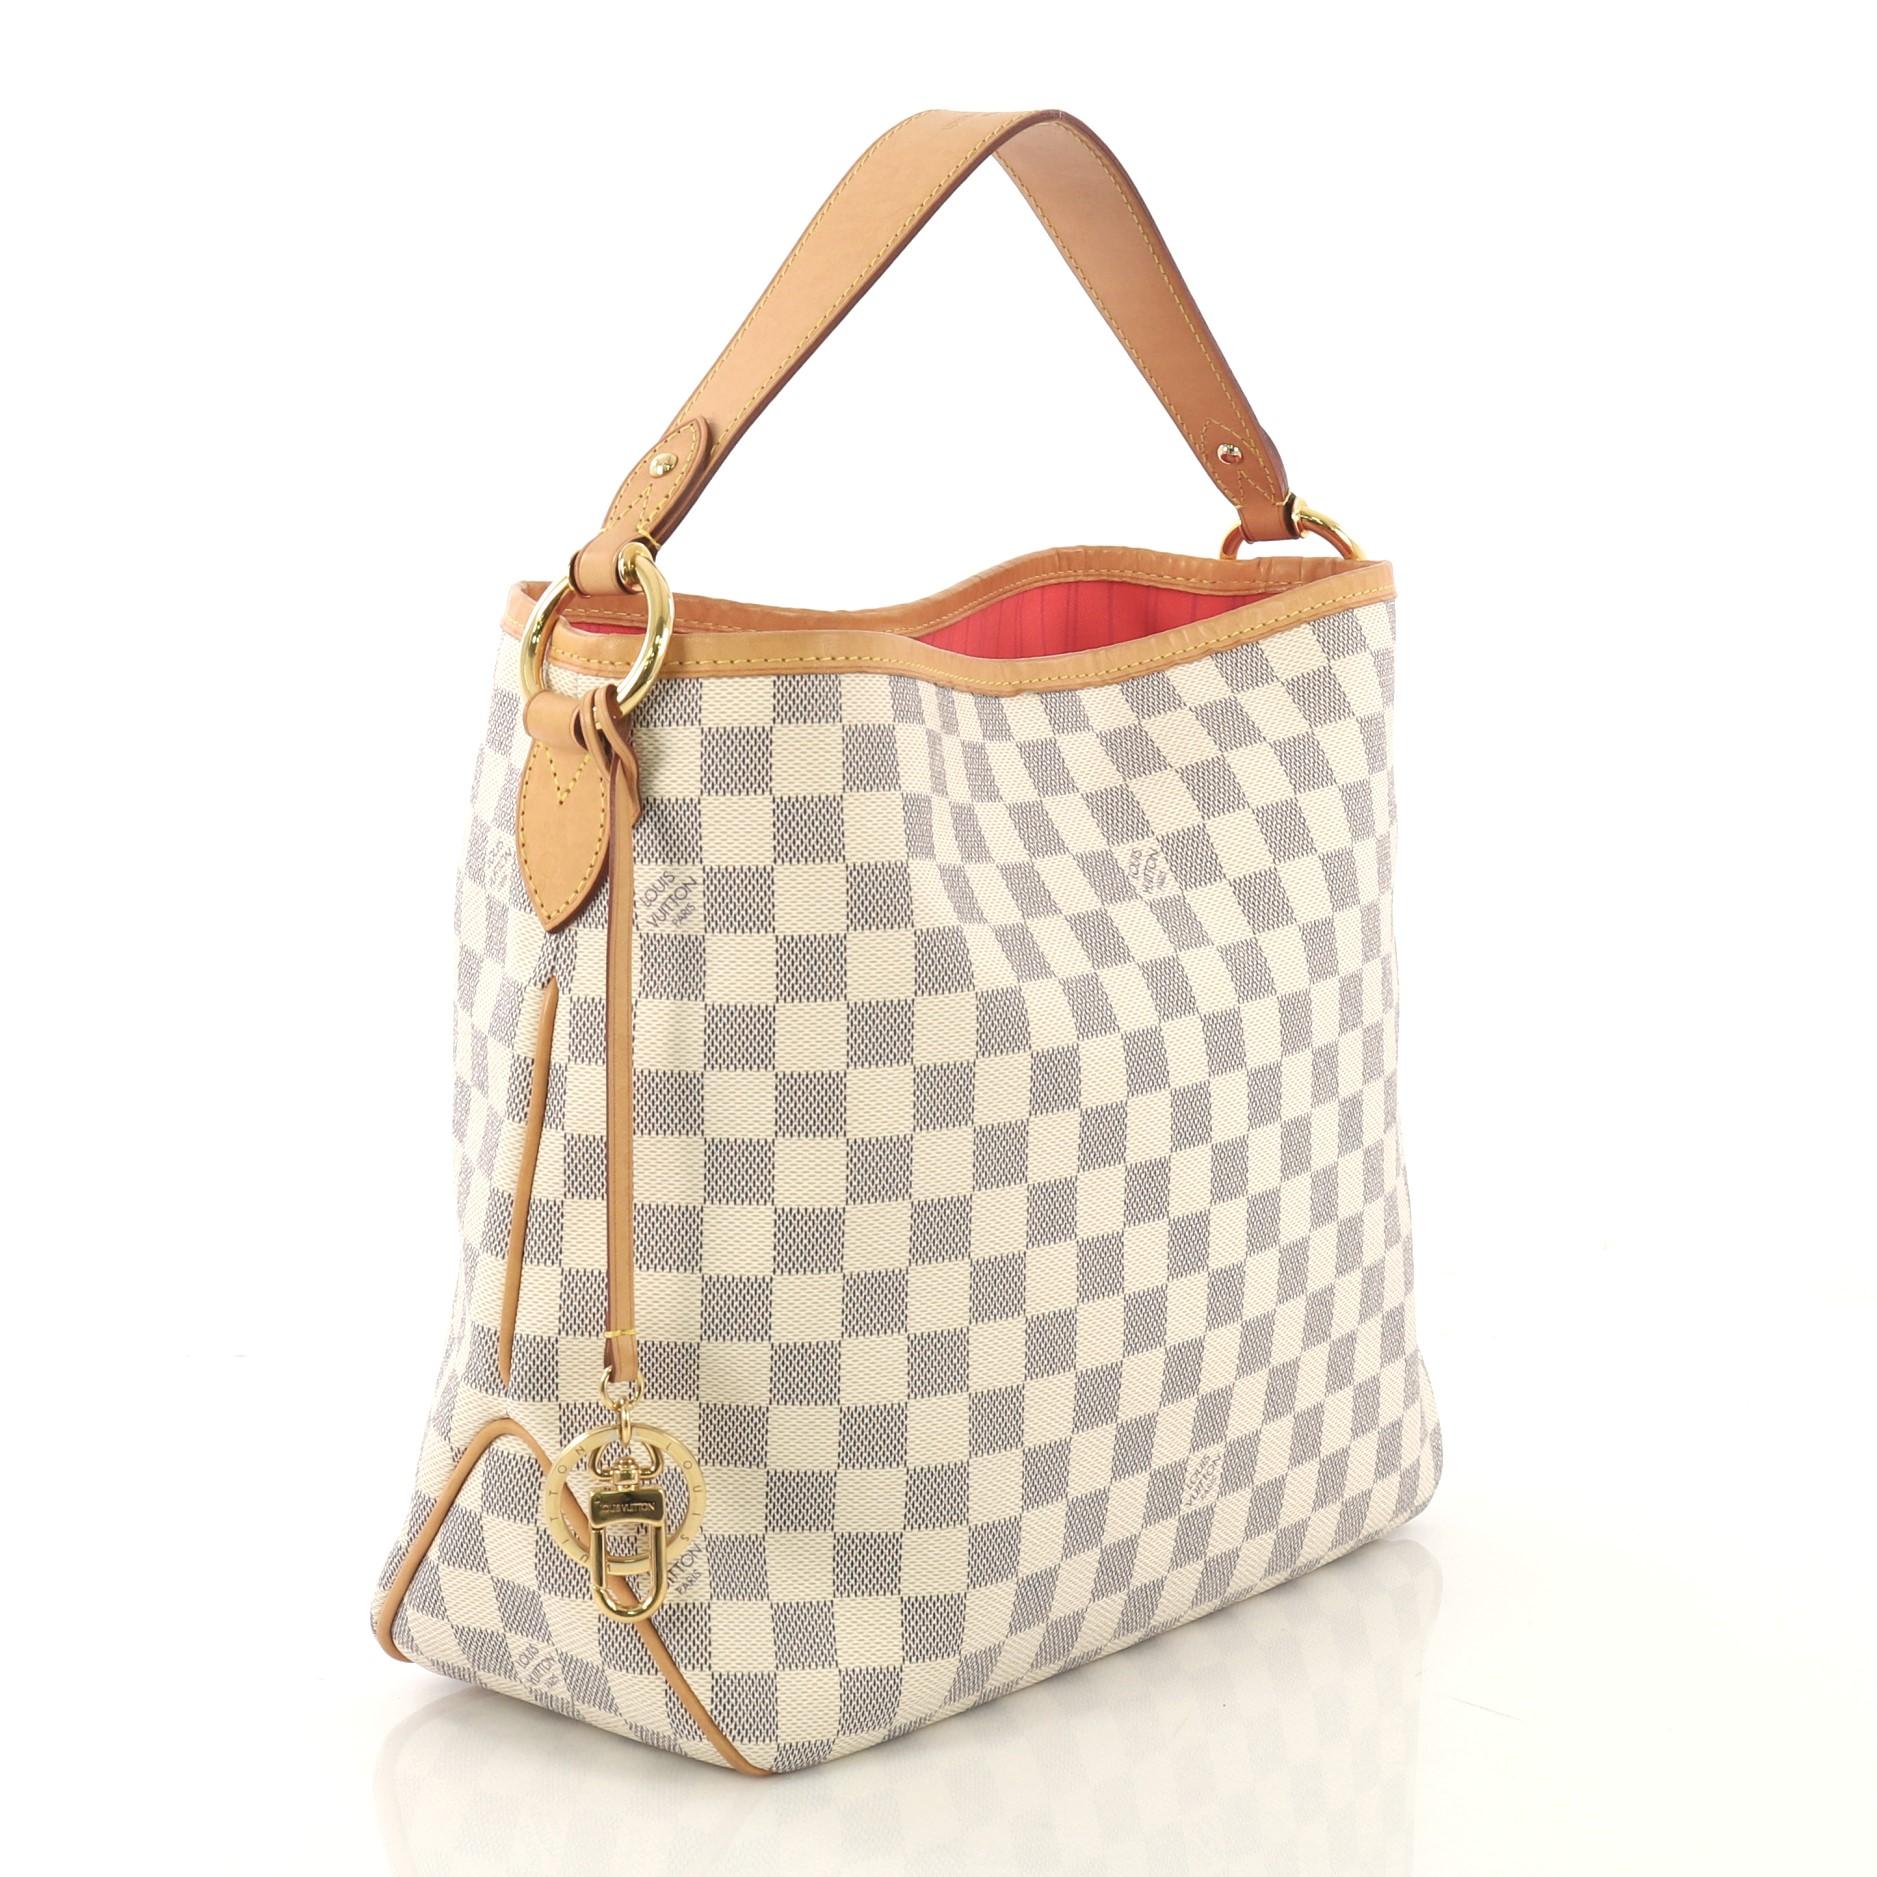 This Louis Vuitton Delightful NM Handbag Damier PM, crafted in damier azur coated canvas, features a flat leather handle and gold-tone hardware. Its hook closure opens to a pink fabric interior with side zip pocket. Authenticity code reads: M12175.